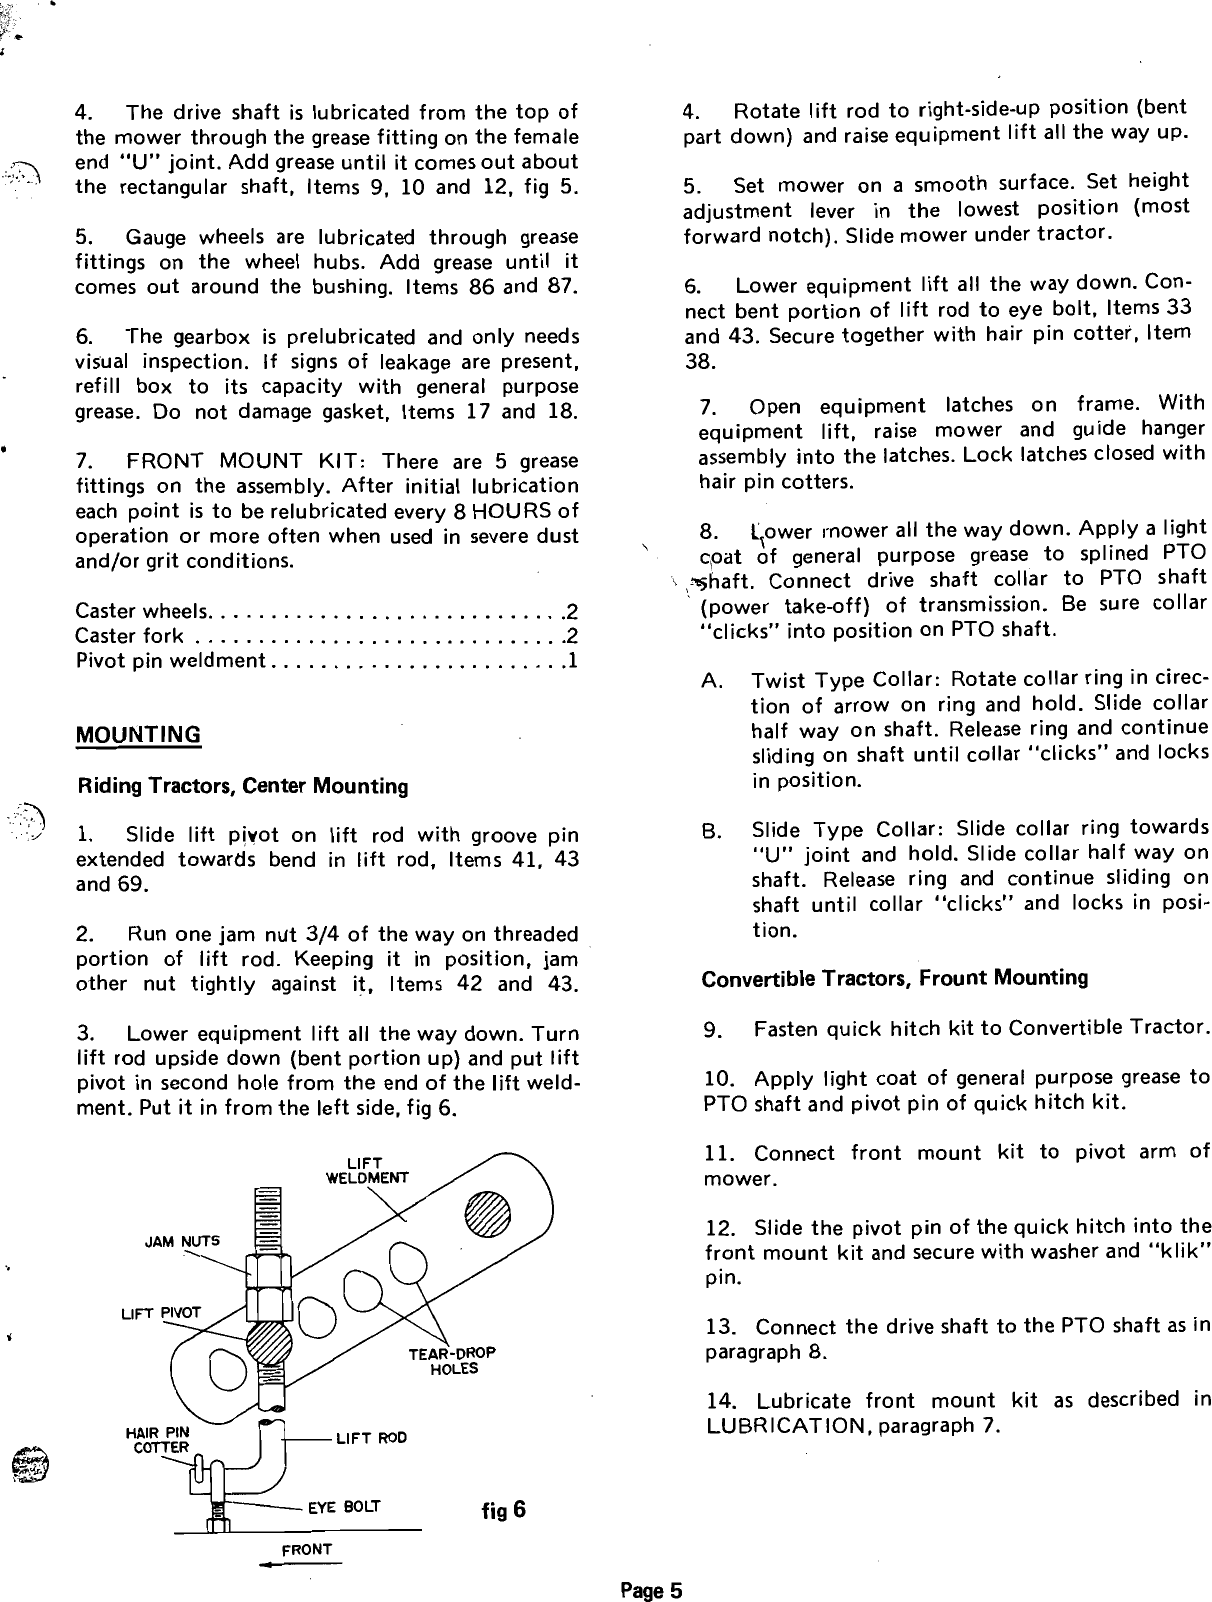 Page 5 of 9 - Gravely 21296-40 User Manual  To The 9c1fbe99-a004-4c0d-bb0f-adc5a923ed34